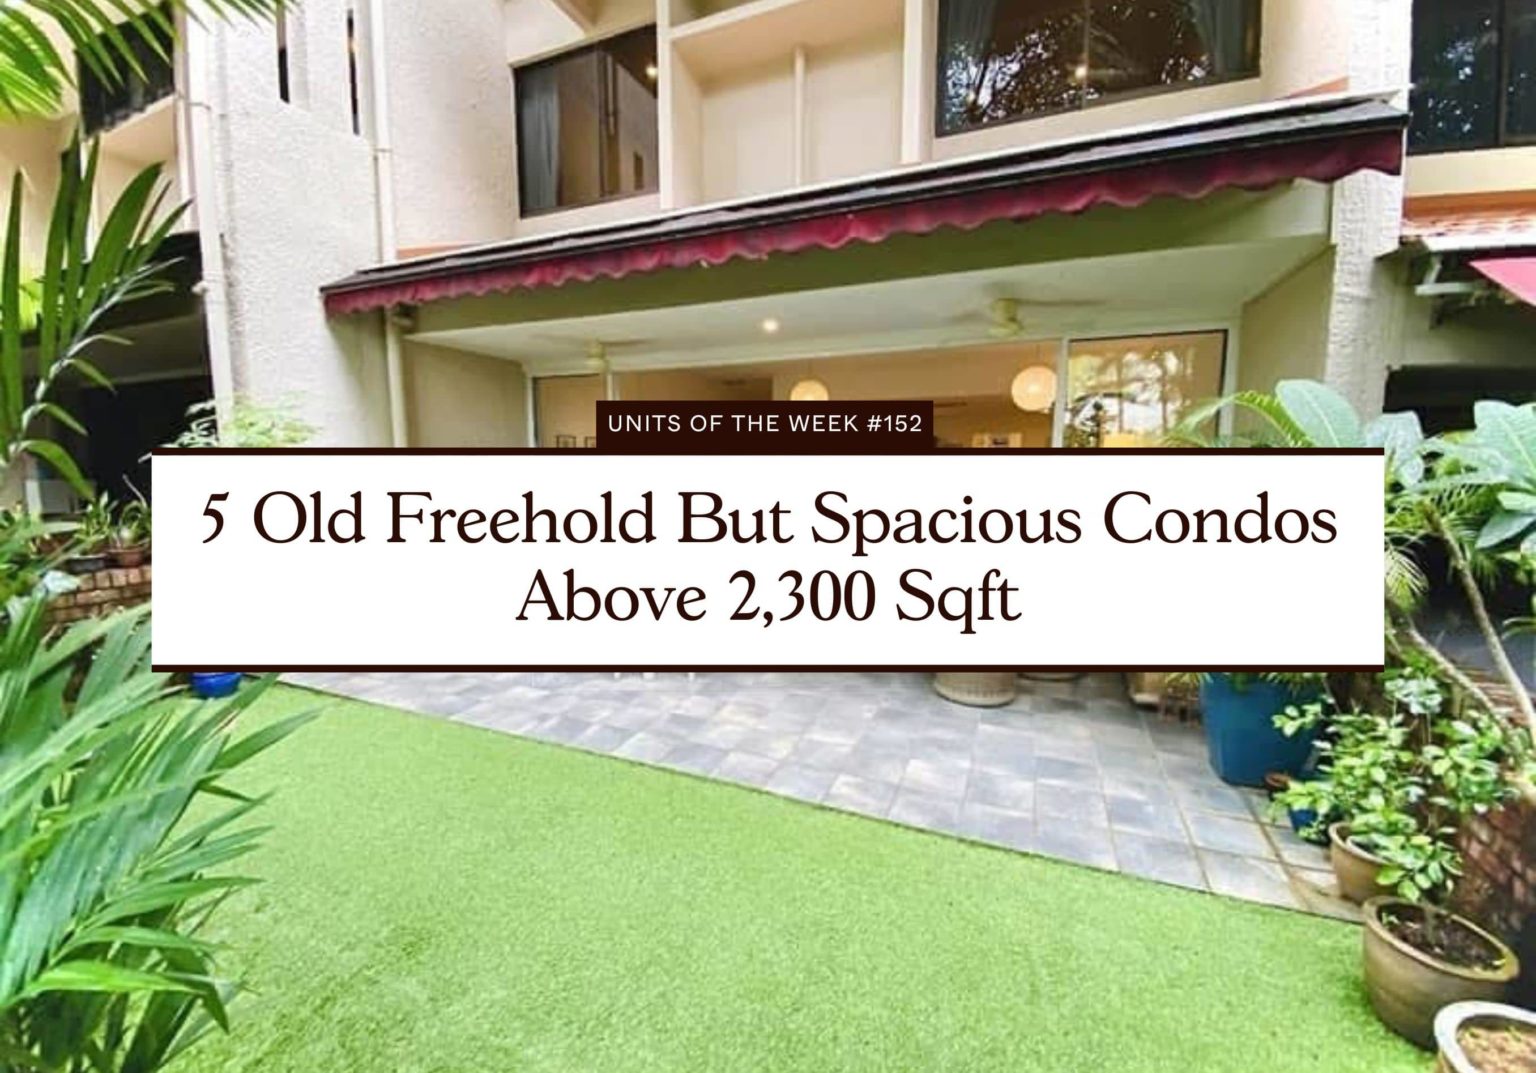 5 Old Freehold But Spacious Condos Above 2300 Sqft